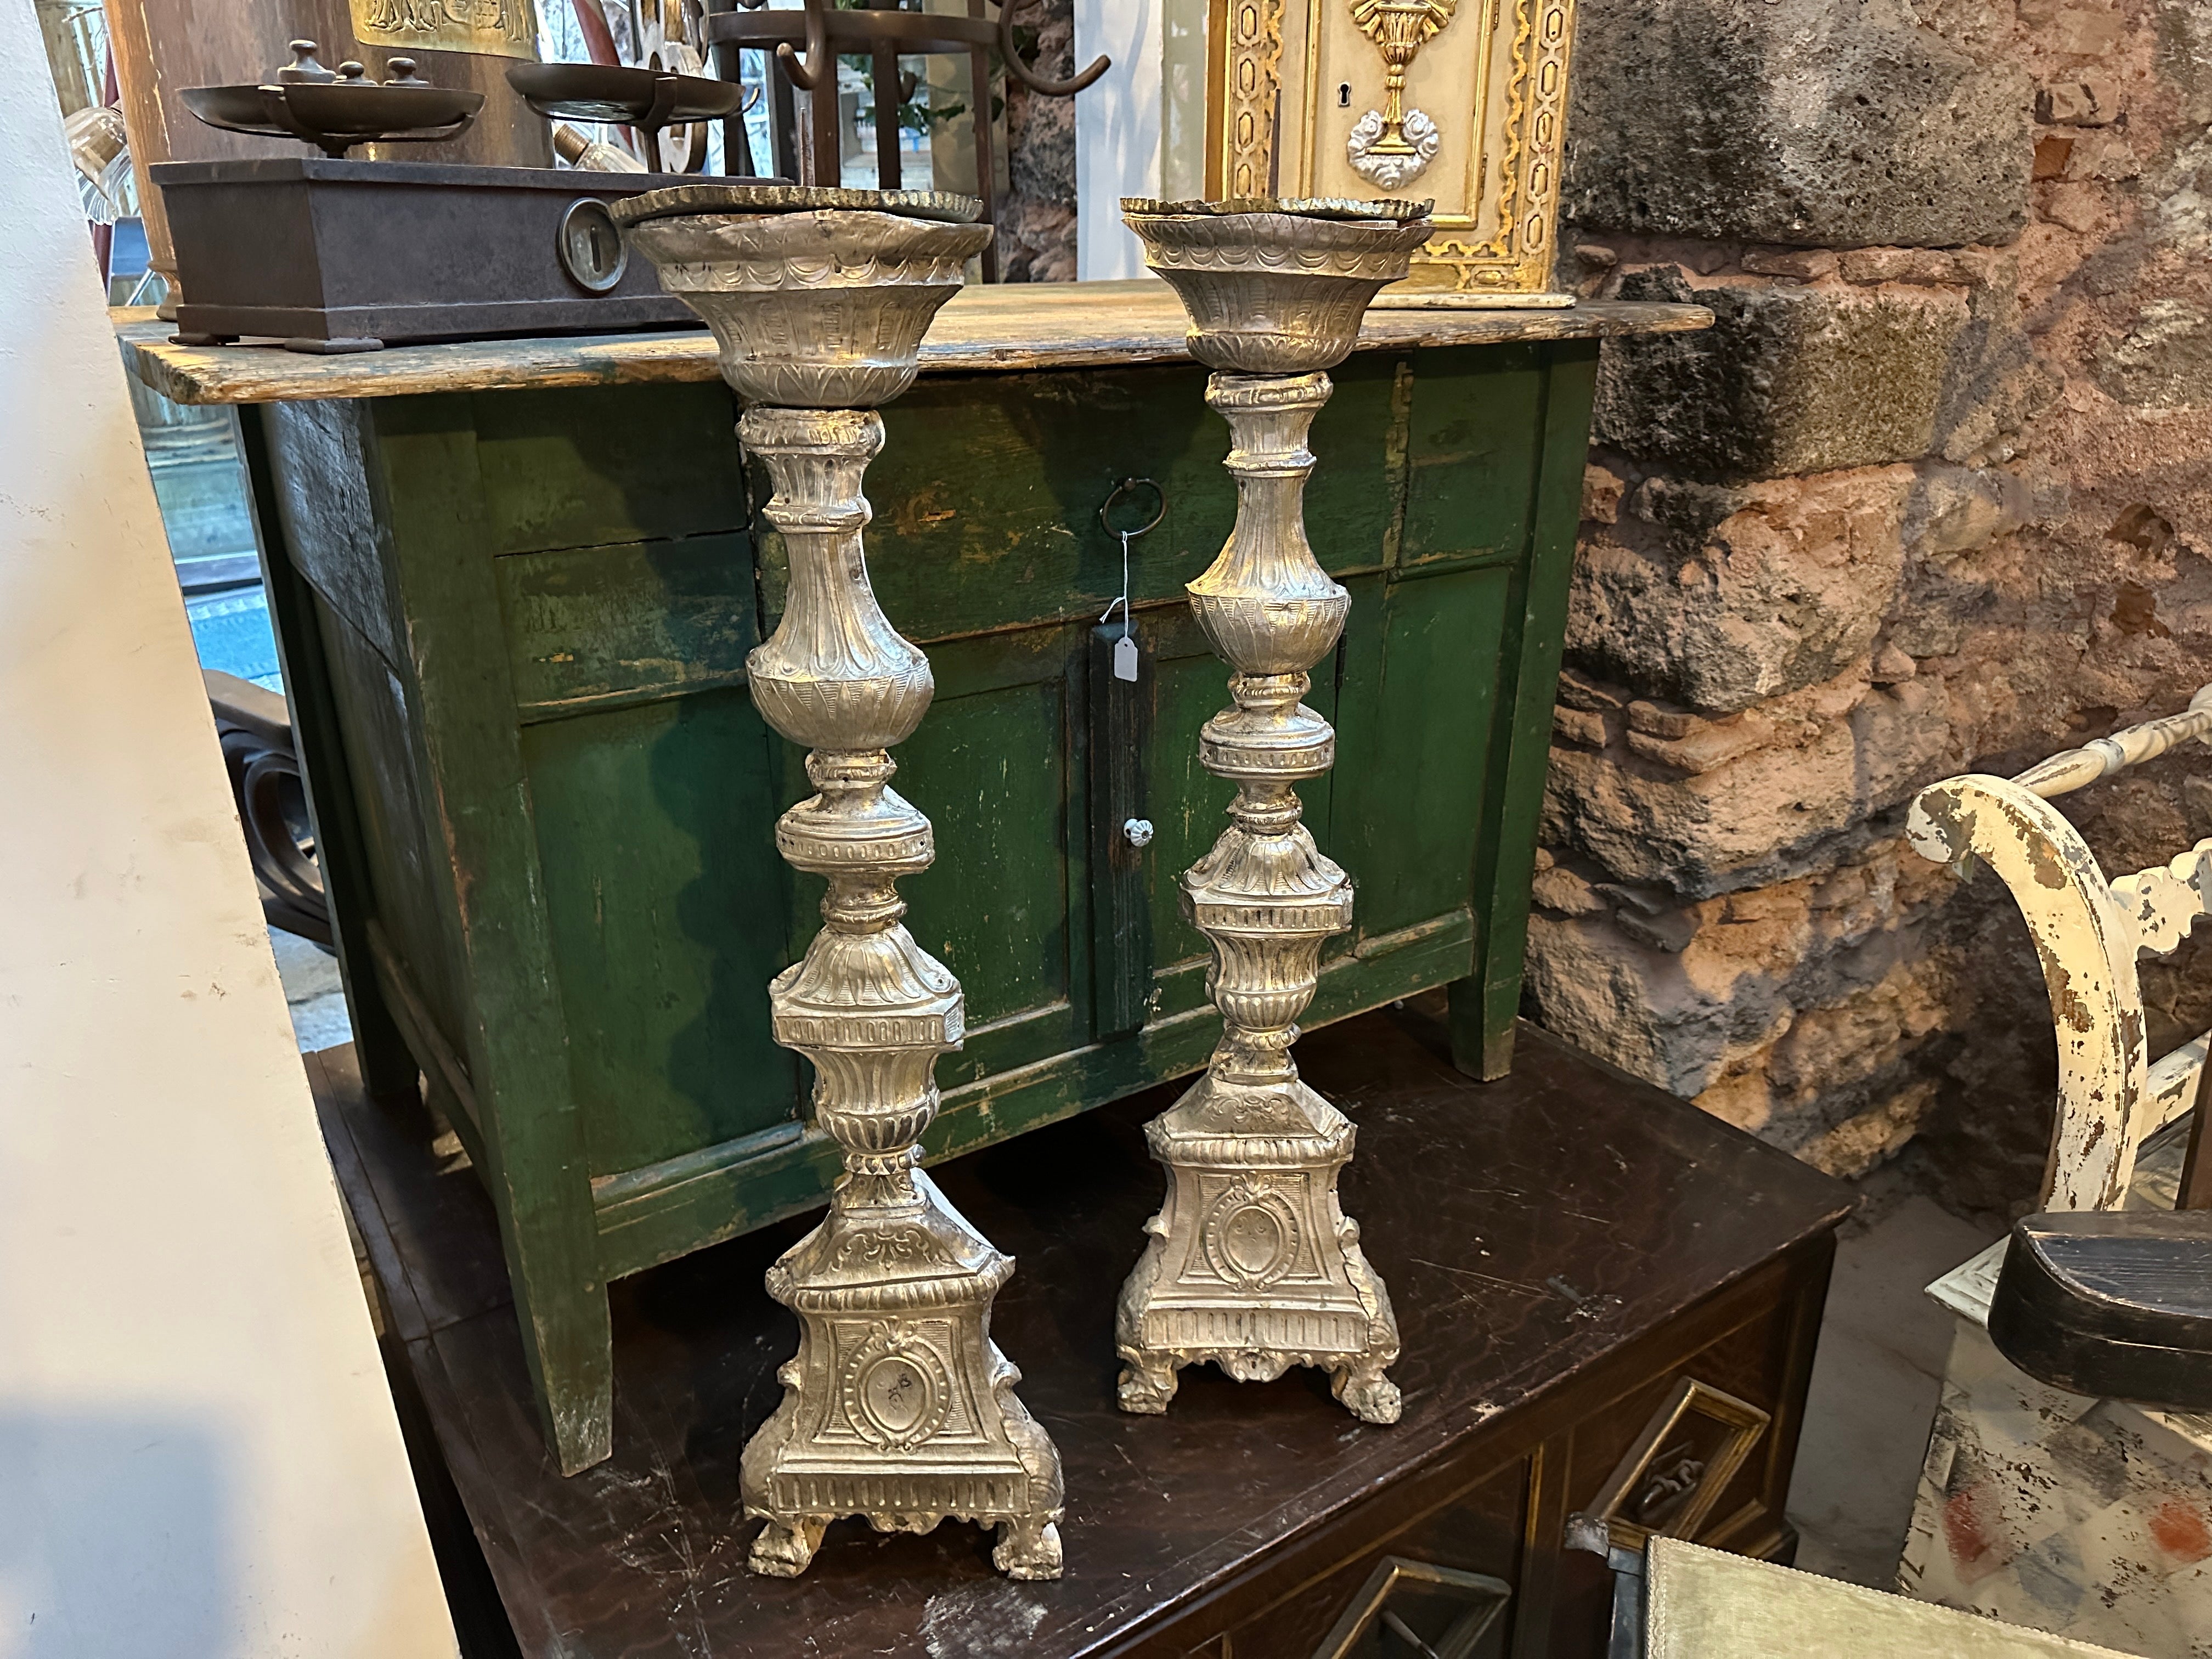 A pair of 18th Century Louis XVI Sicilian Torcheres in original conditions, never restored with consistent signs of use and age that were likely used in a private church or chapel setting. The torcheres would have been used to hold candles or